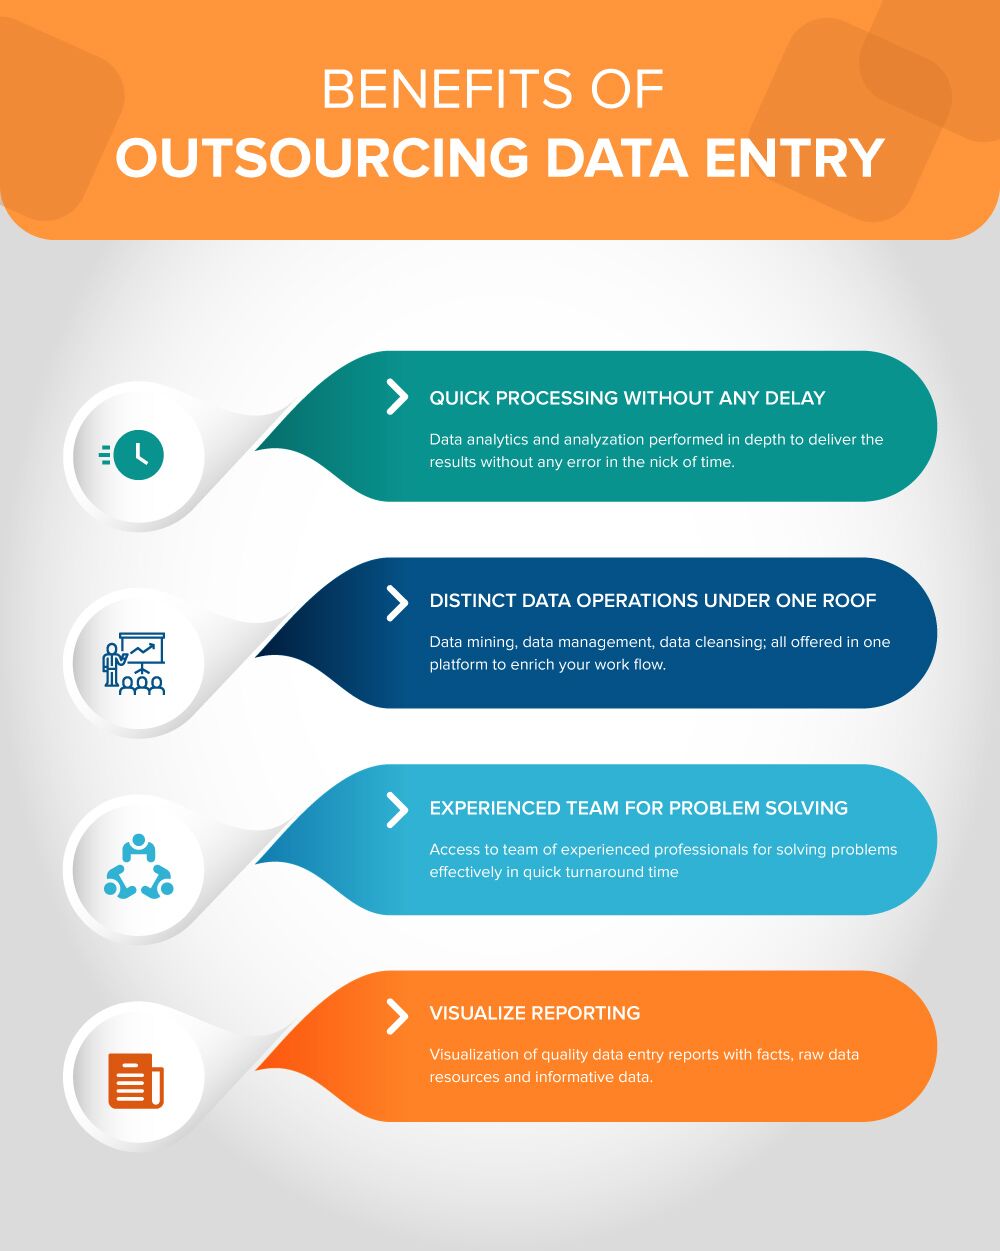 7 Mistakes to Avoid While Doing Data Entry for a Business AllOntario